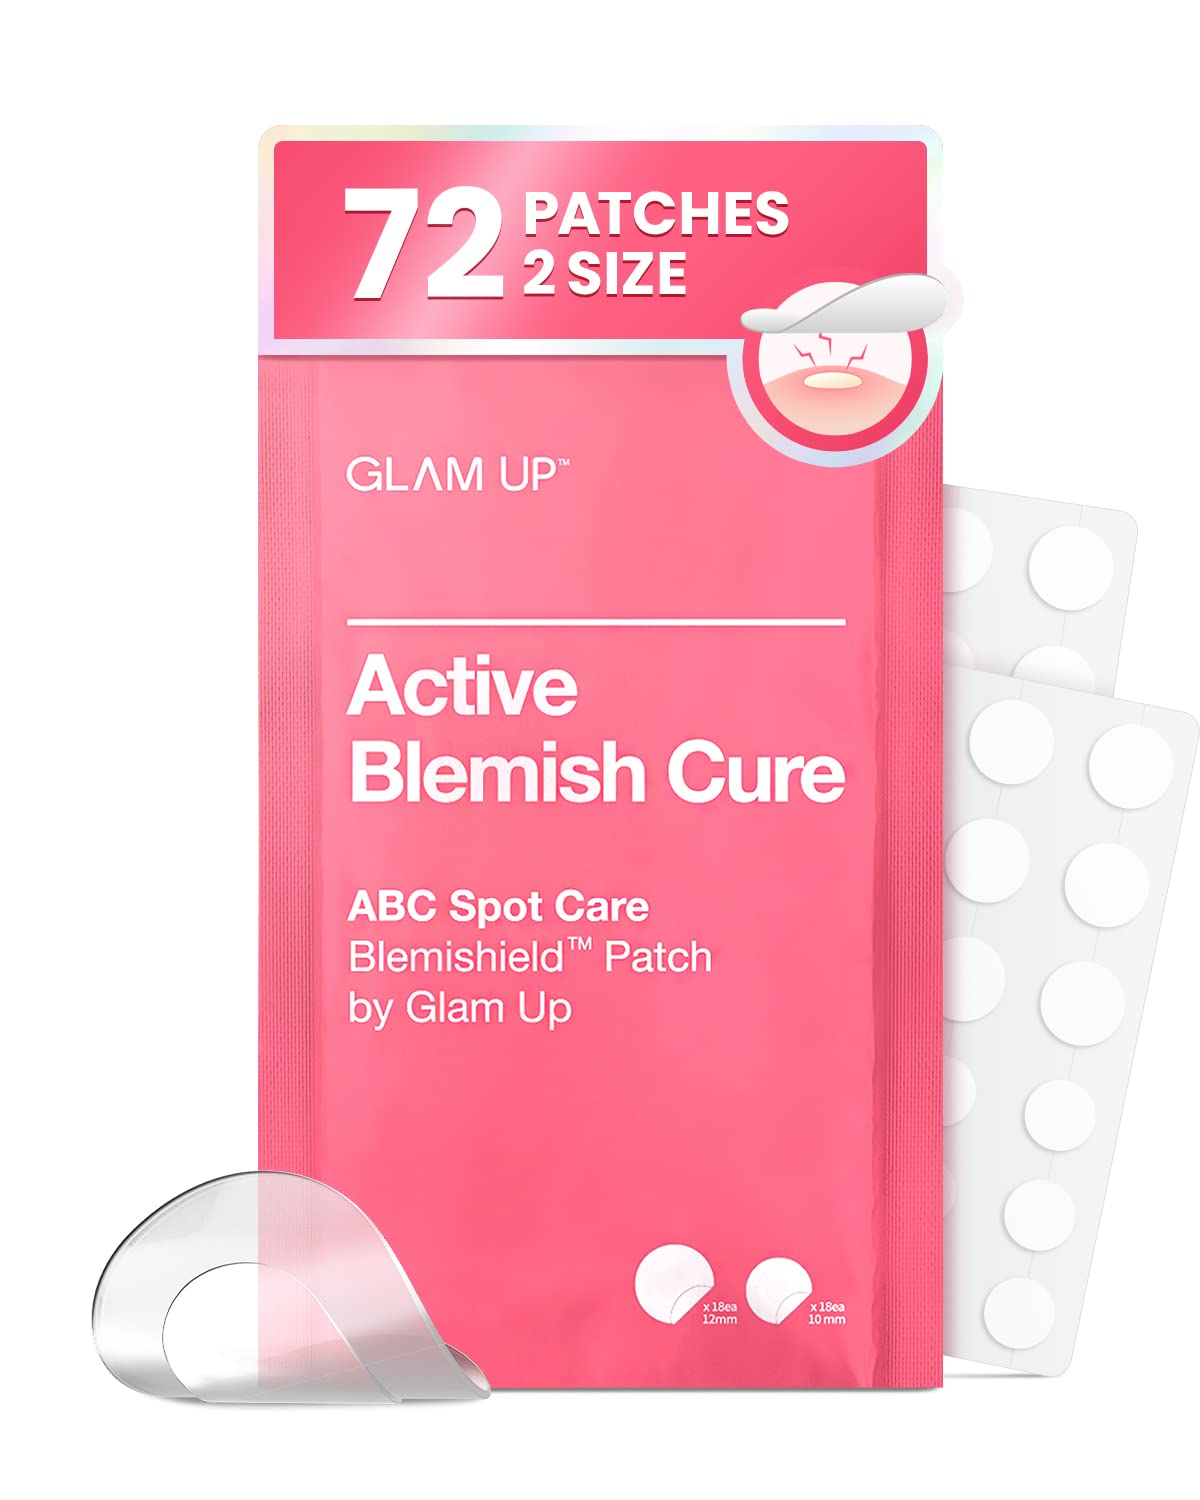 GLAM UP Hydrocolloid Blemish Pimple Zit Patches - Invisible Ultra Thin Spot Cover Stickers for Face and Skin, Strong Water-proof and Adhesive Overnight, Vegan-friendly (72 Count / 2 Sizes)